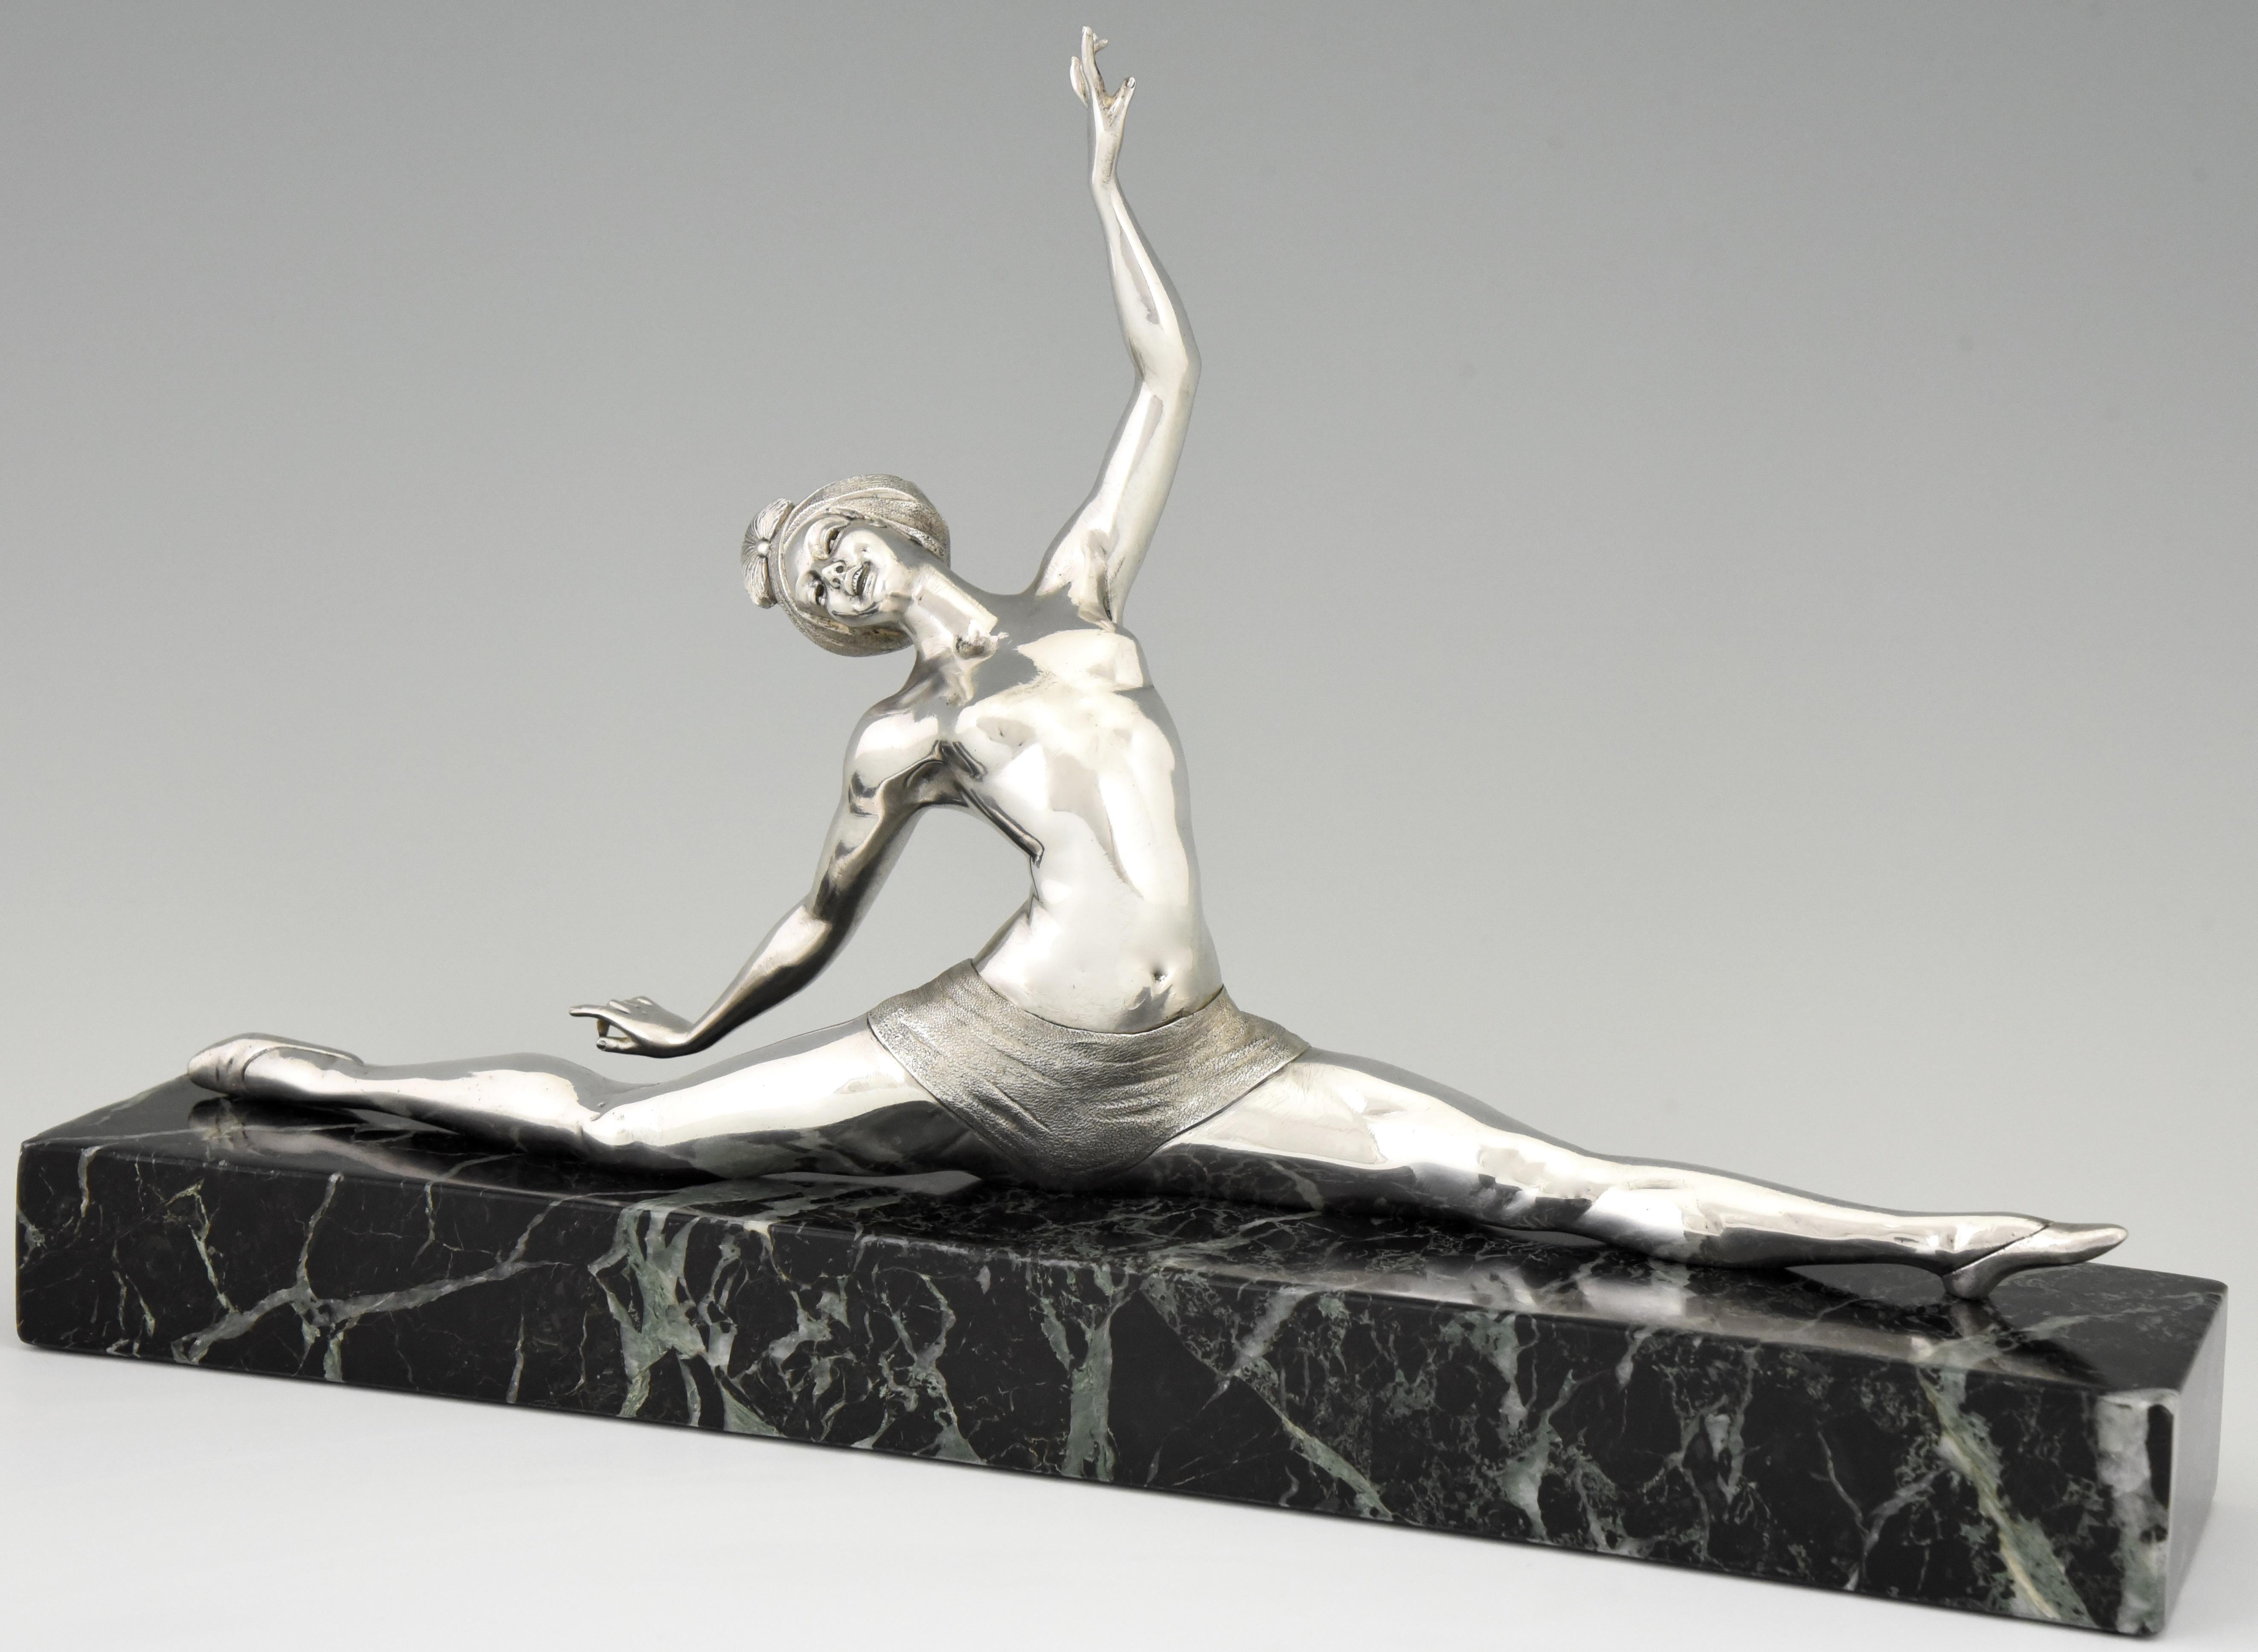 Art Deco silvered bronze sculpture of a female nude dancer in a split pose by the French artist J. P. Morante. The figurine is mounted on a marble base. France 1925. 

This bronze is illustrated on page 224 of ?“Art Deco and other figures” by